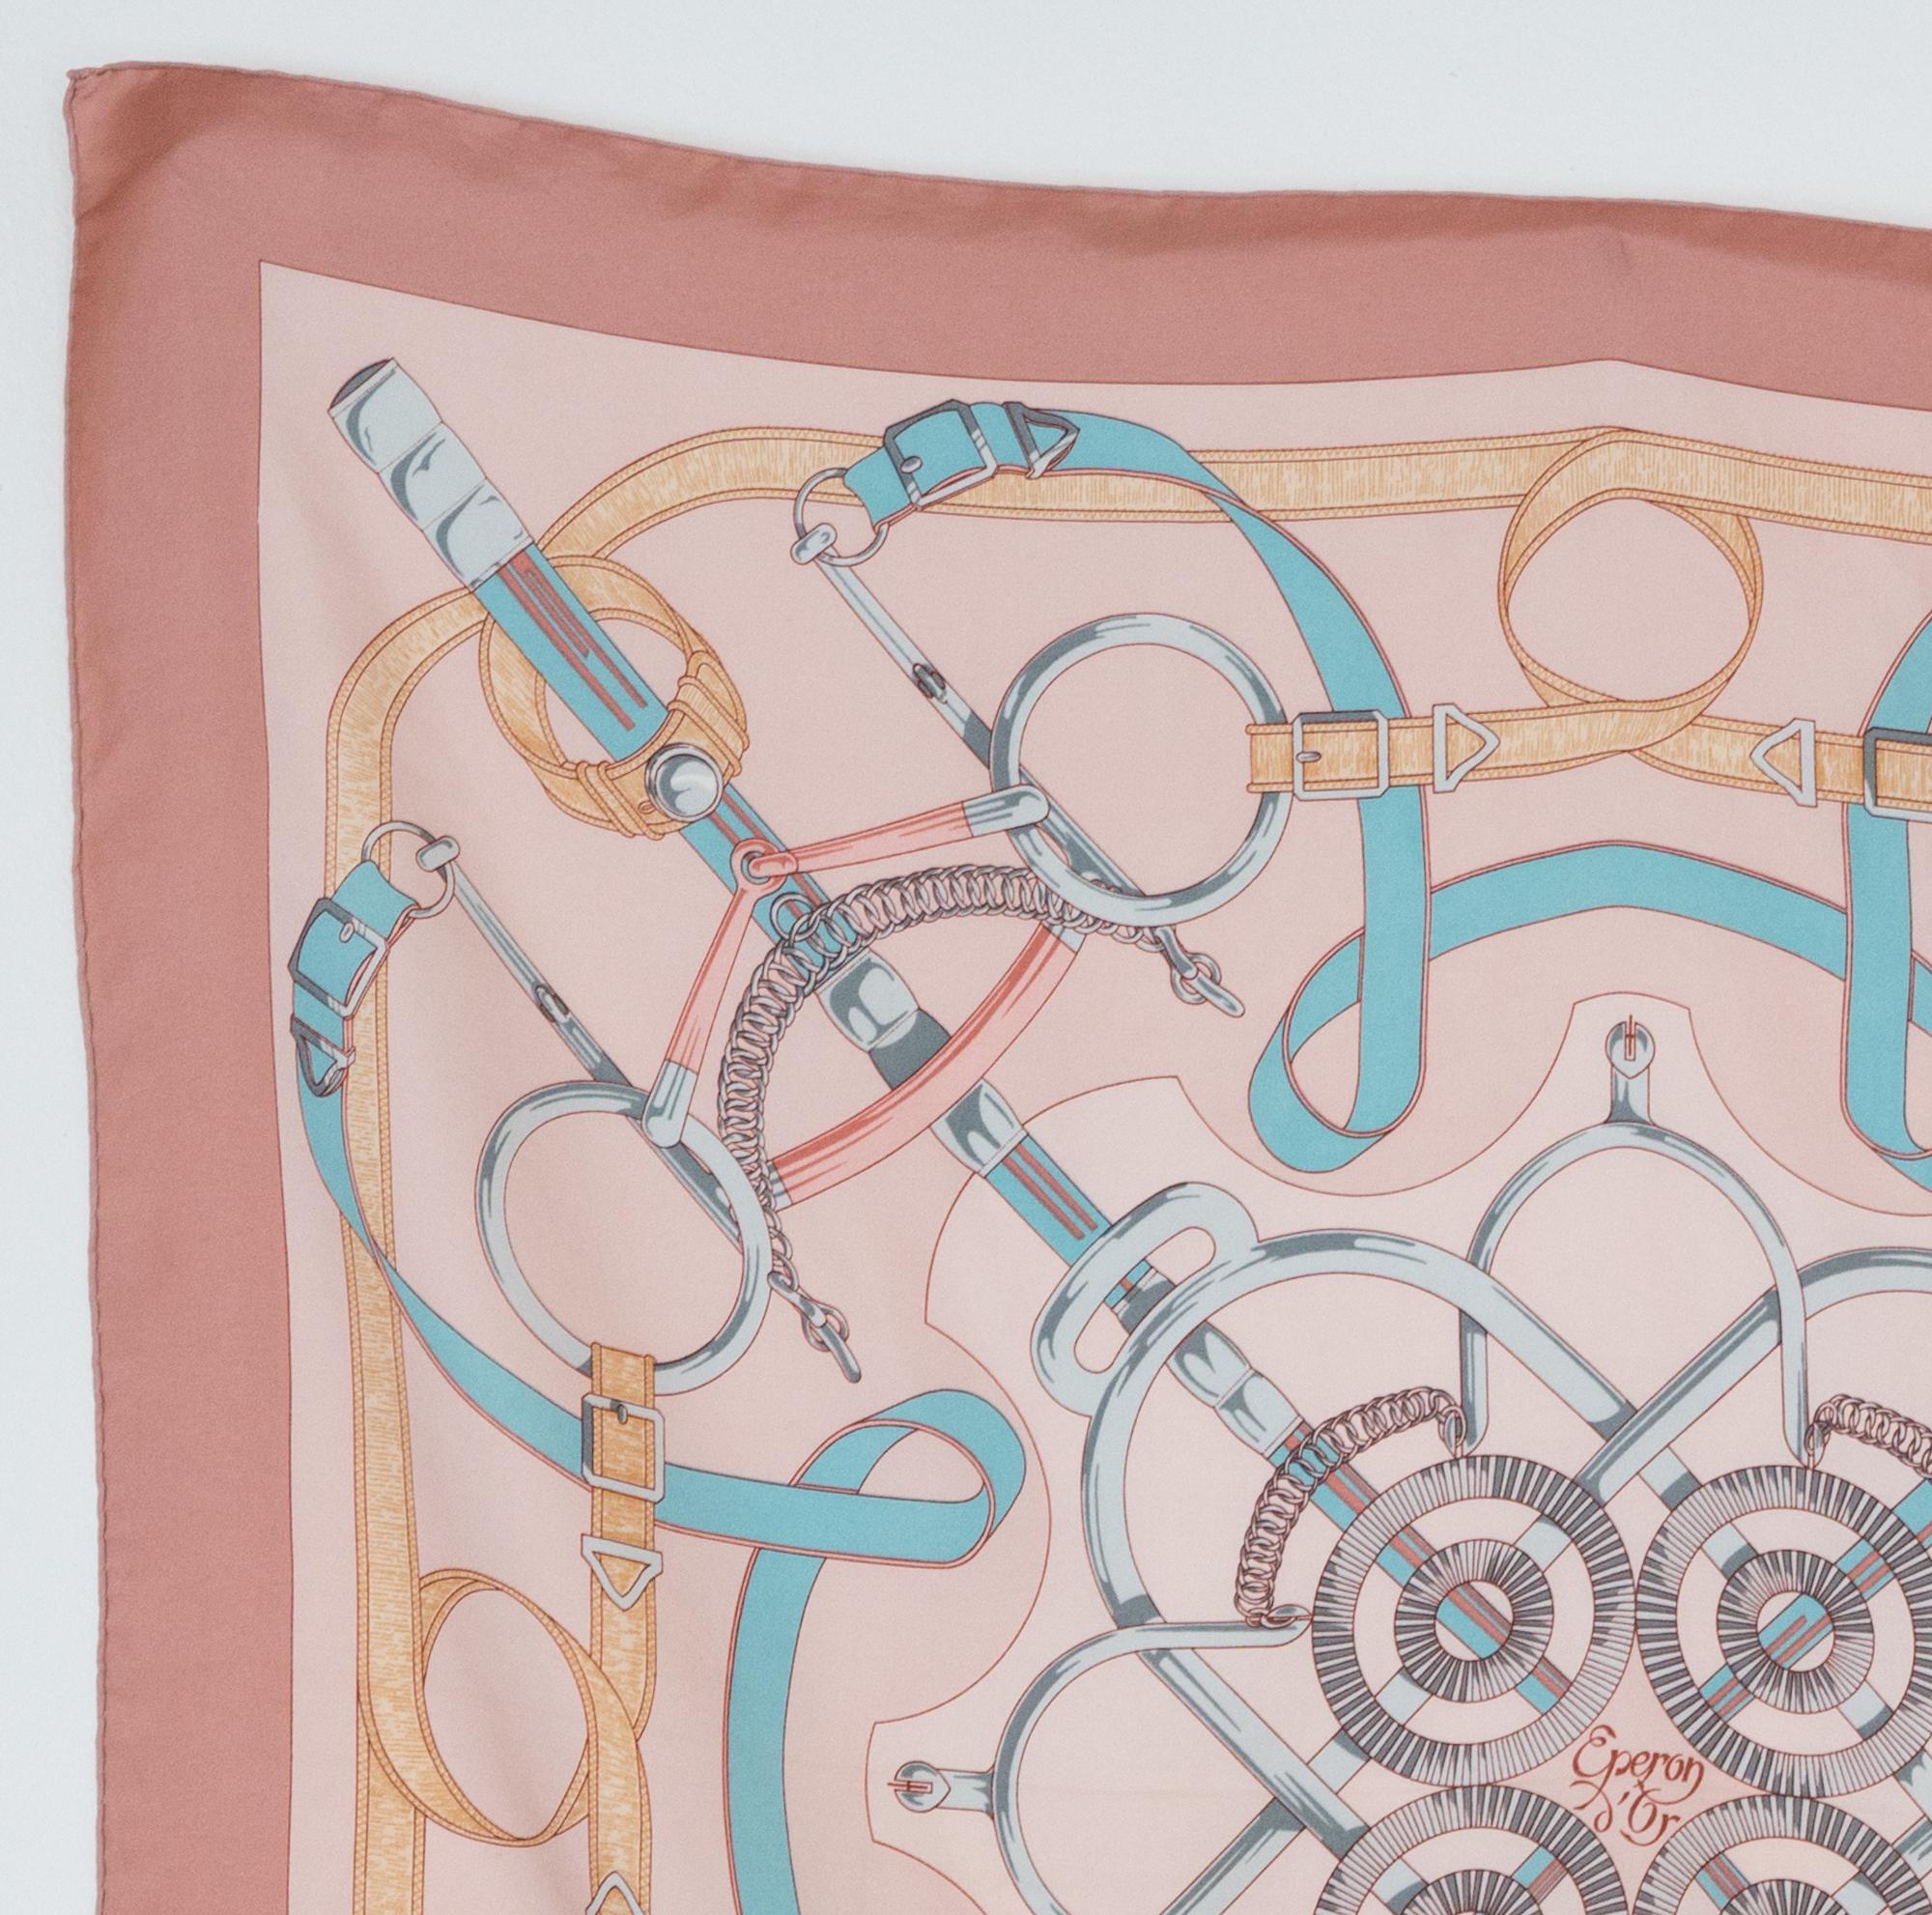 Hermes silk scarf Eperons d'Or by H. d'Origny featuring a light pink ground.
In good vintage condition. Made in France.
35,4in. (90cm)  X 35,4in. (90cm)
We guarantee you will receive this  iconic item as described and showed on photos.
(please